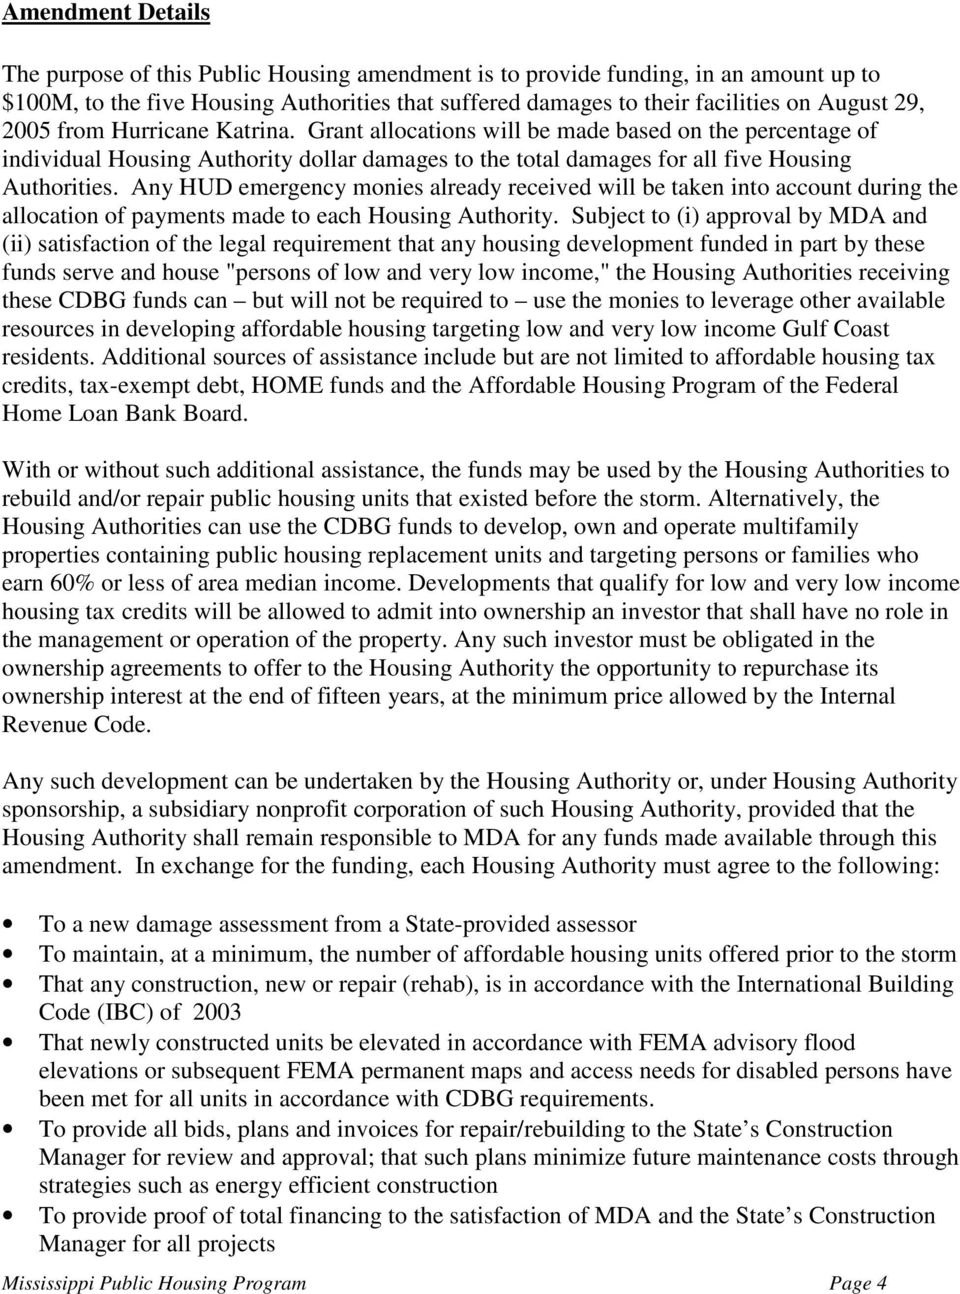 Any HUD emergency monies already received will be taken into account during the allocation of payments made to each Housing Authority.